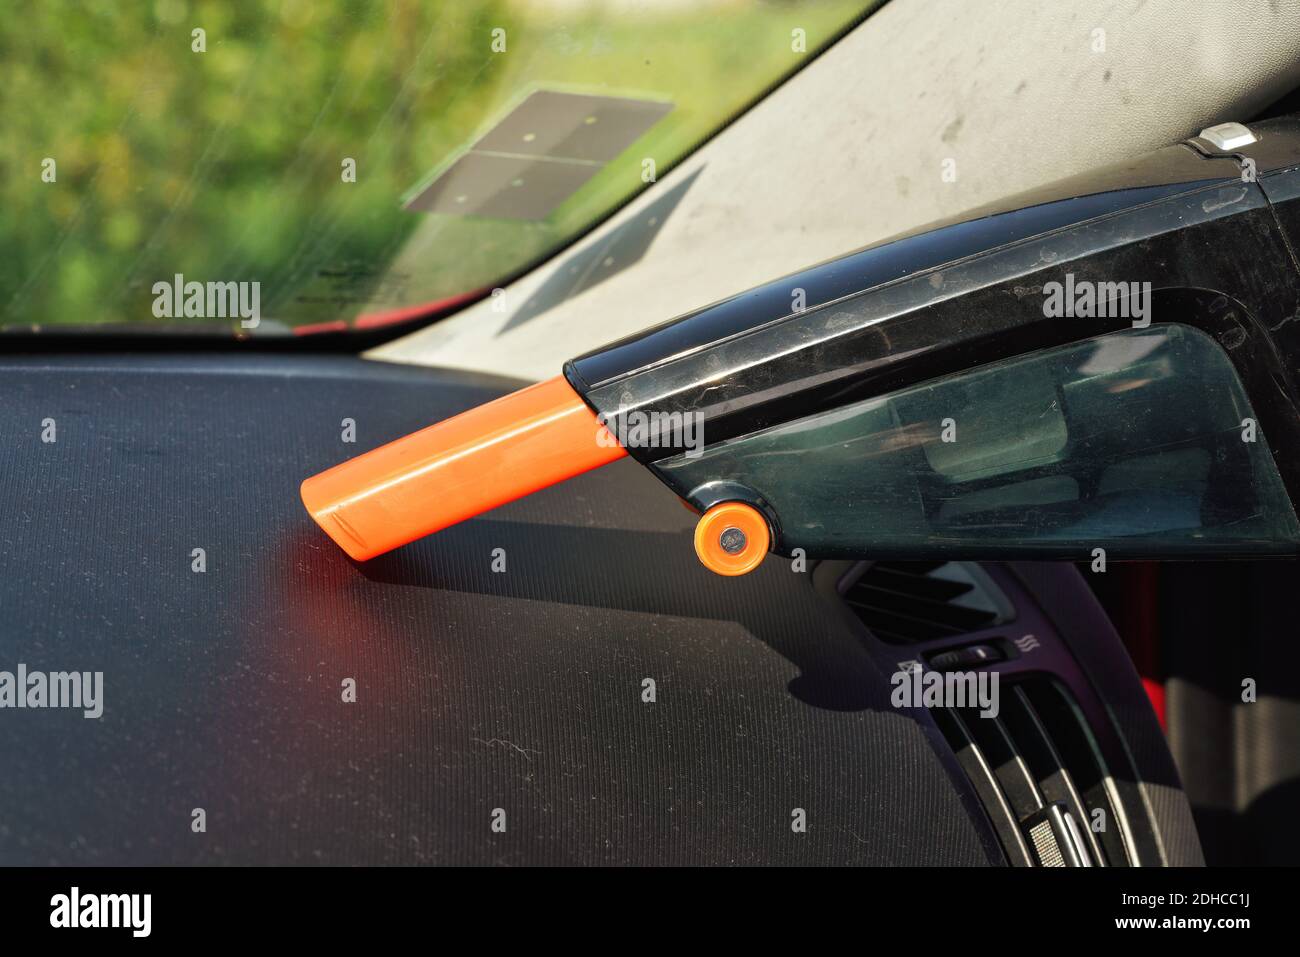 Car dashboard cleaned from dust with small orange portable vacuum cleaner Stock Photo